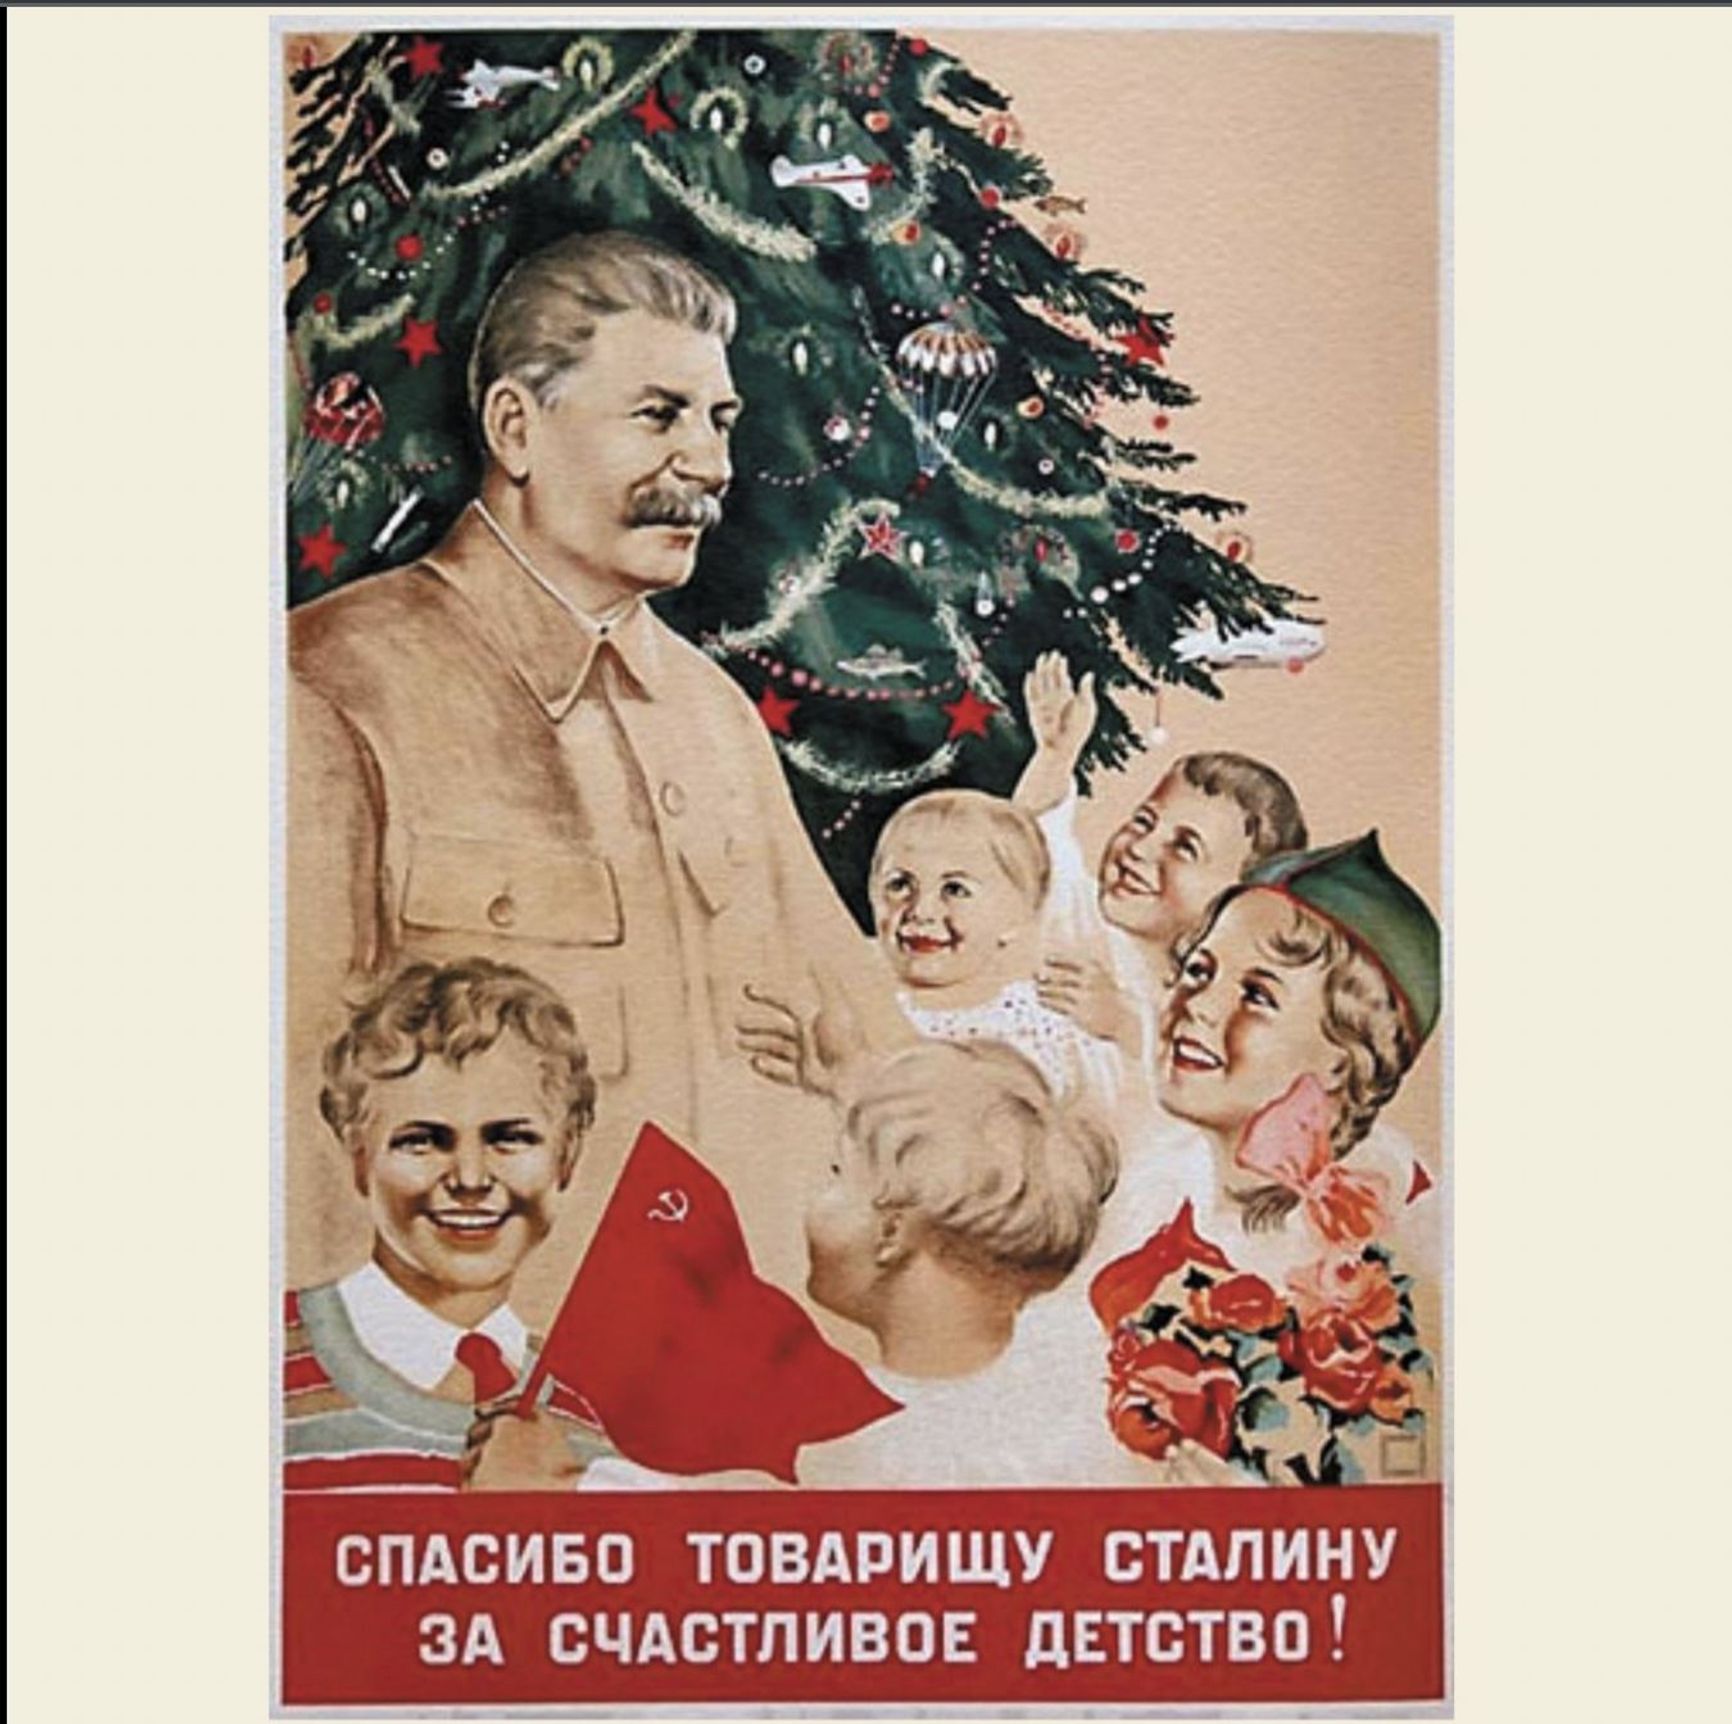 Poster "Thanks to Comrade Stalin for a Happy Childhood!", 1938